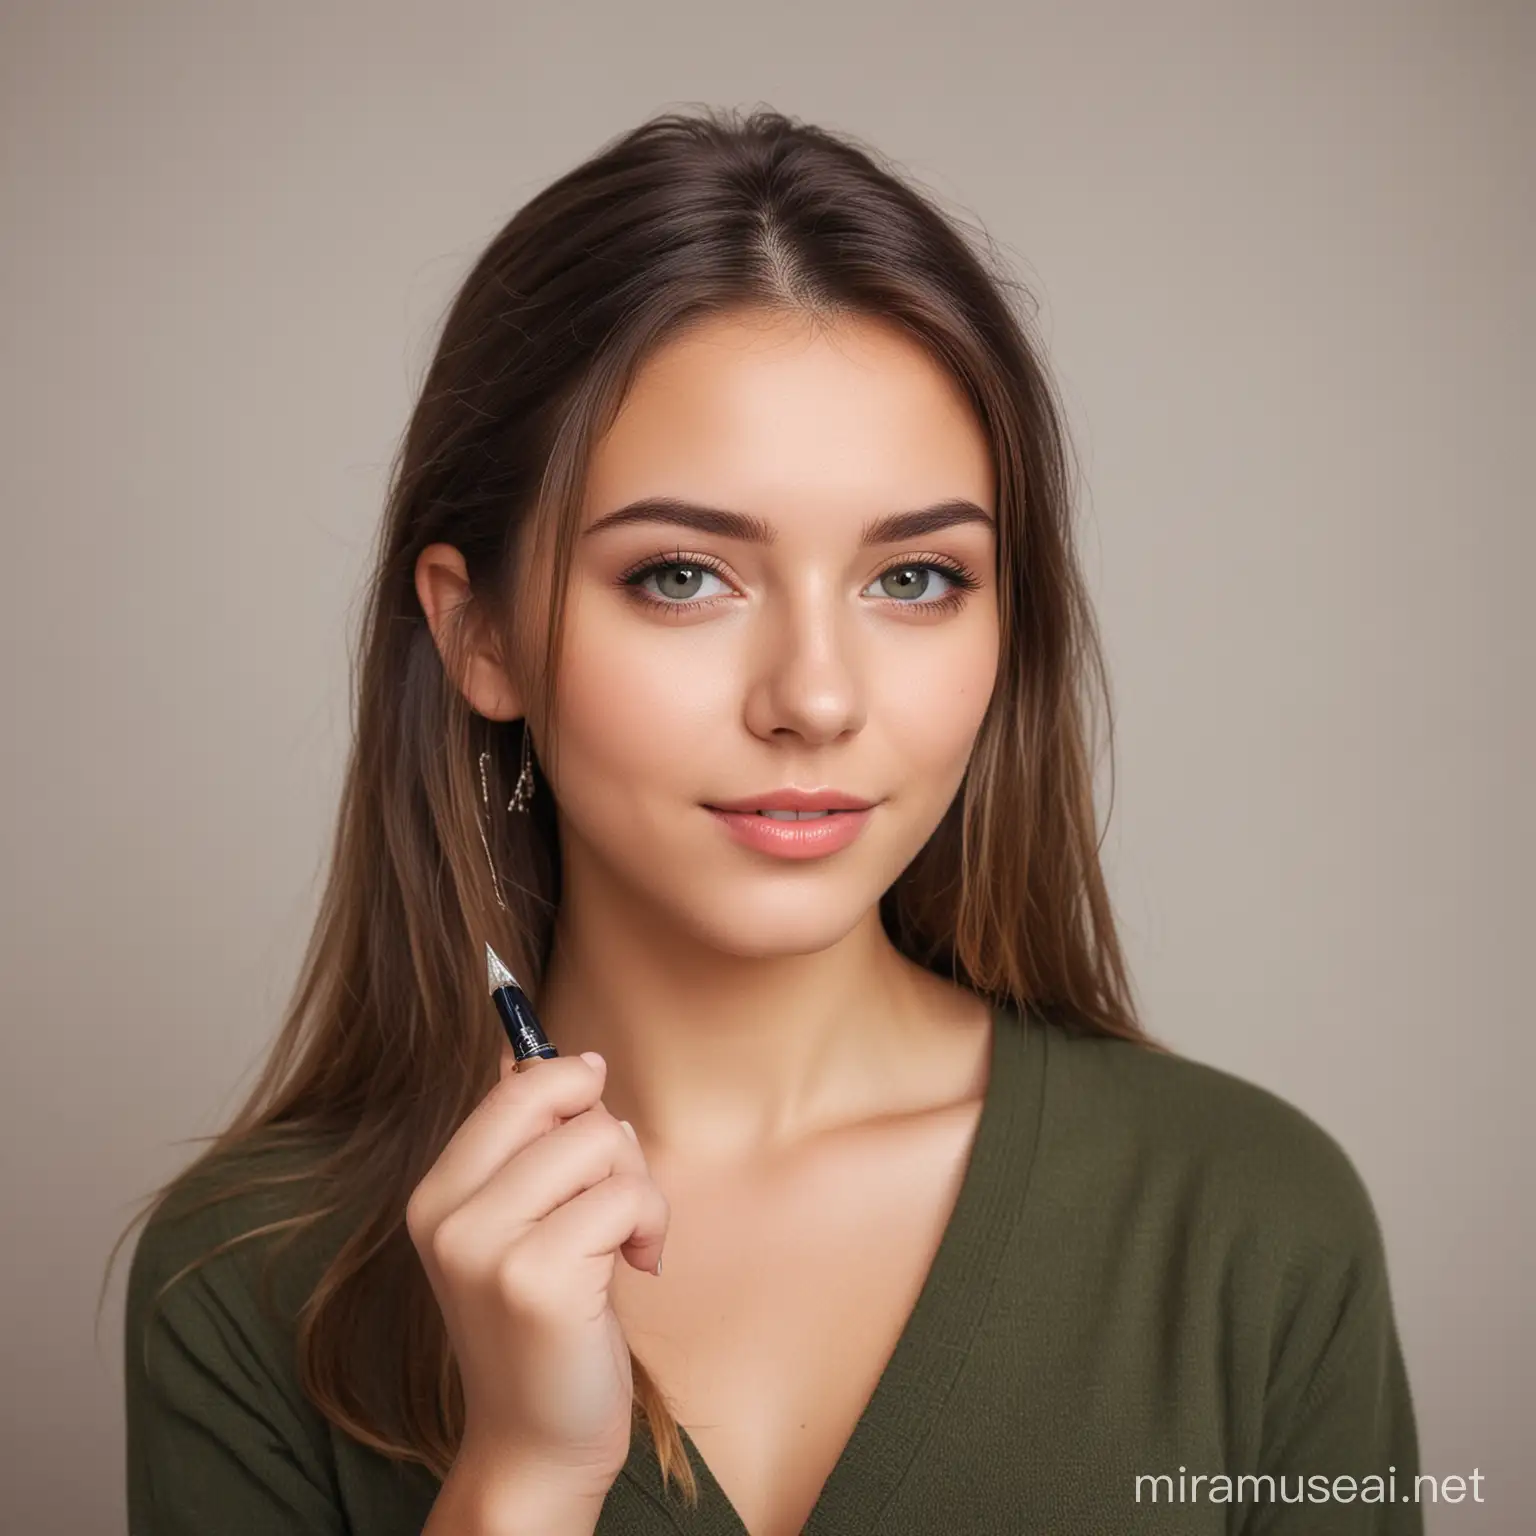 Beautiful girl holding a pen in her hand